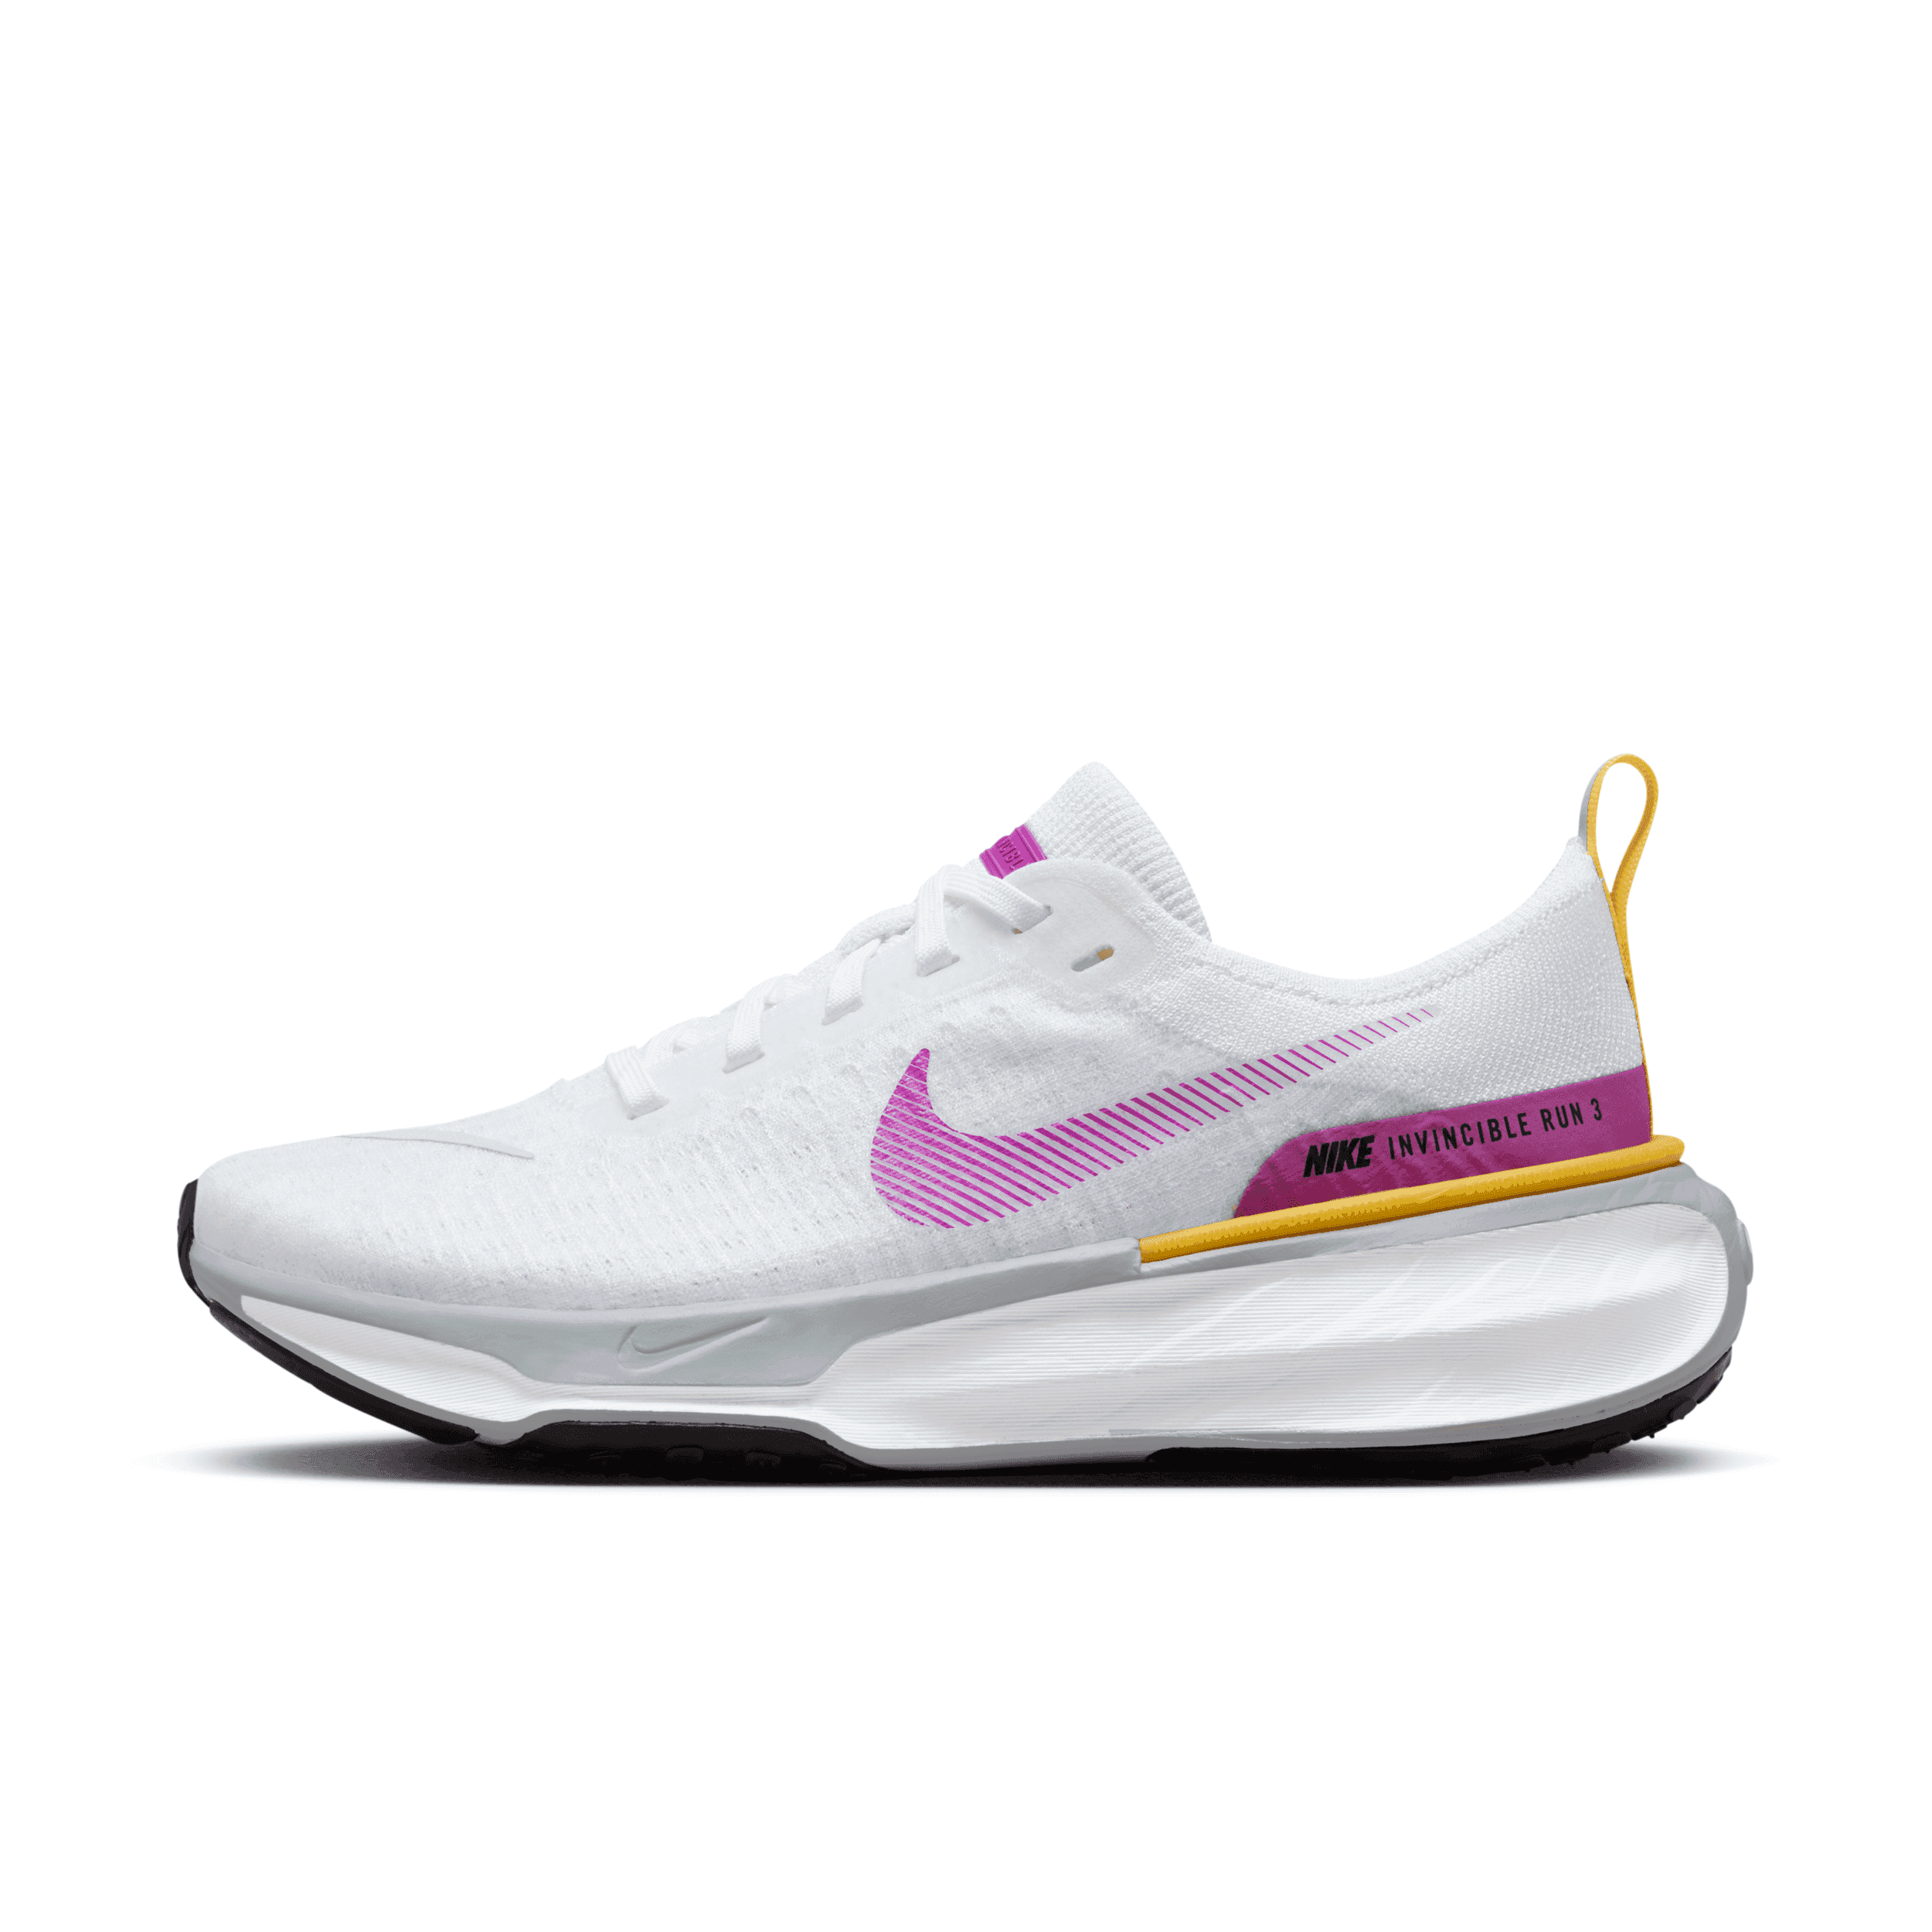 Nike Women's Invincible 3 Road Running Shoes in White, Size: 11 | DR2660-101